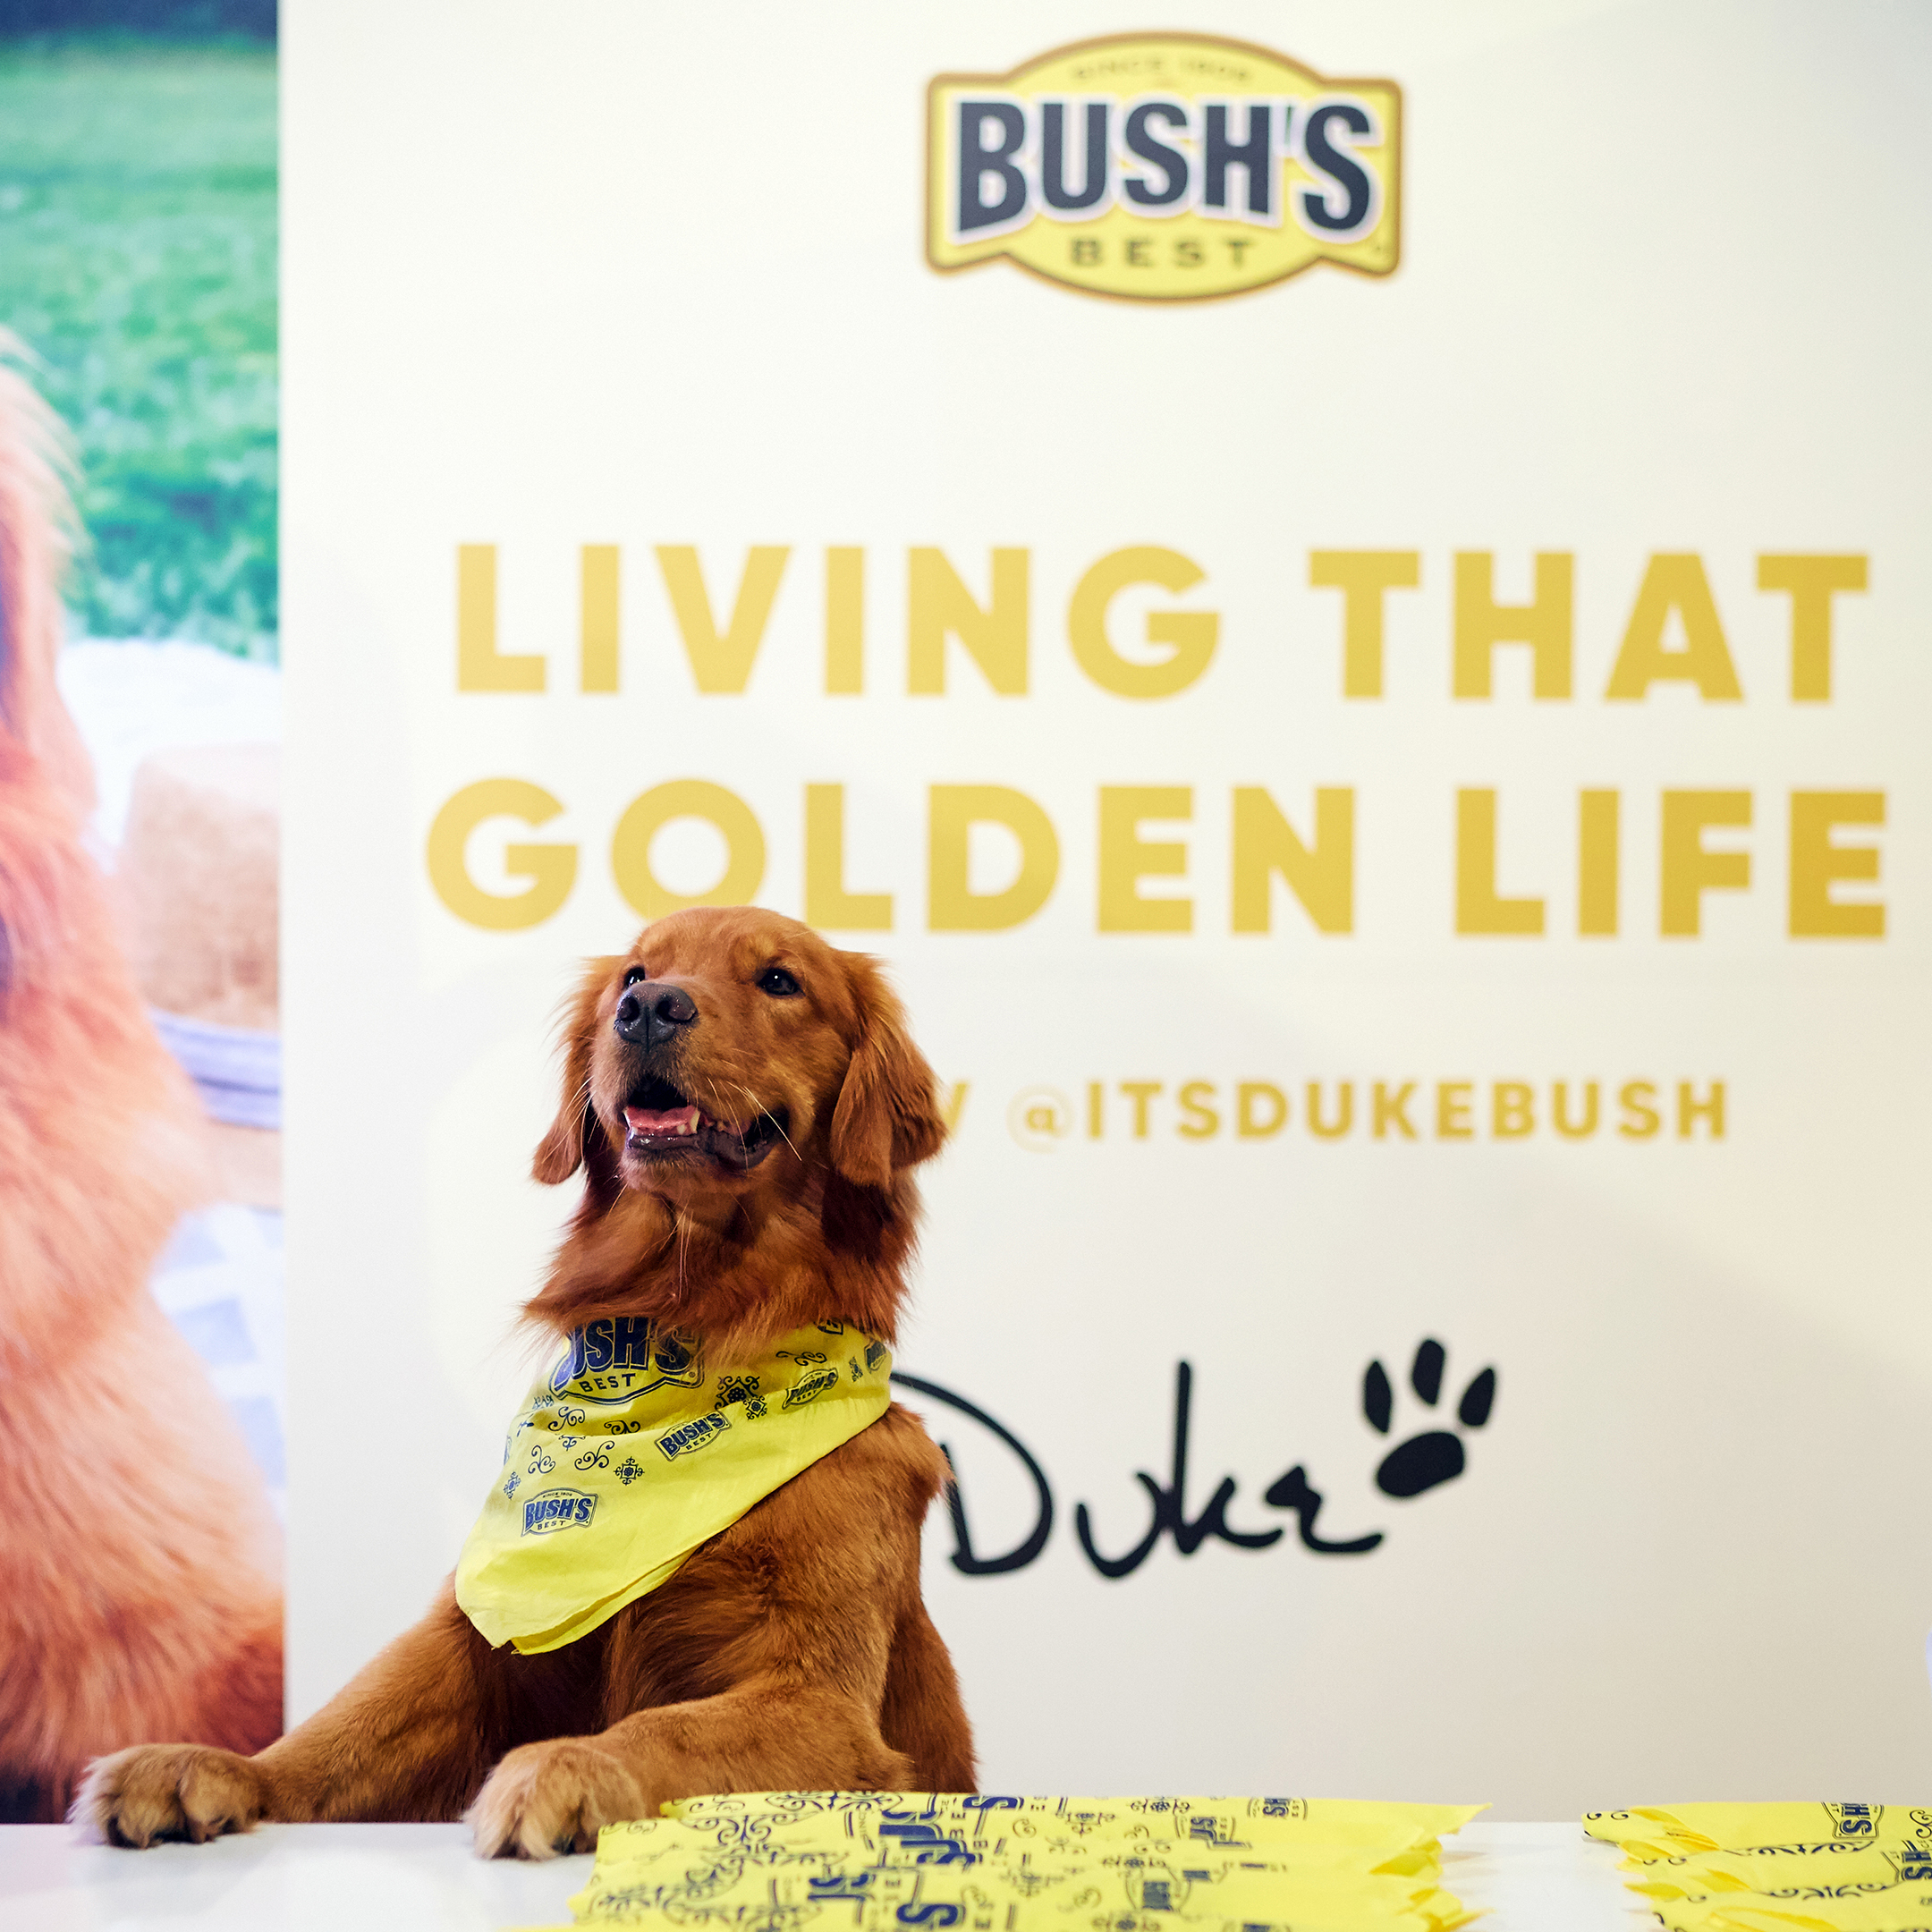 Duke greeted PetCon Los Angeles attendees at the BUSH'S booth on Saturday, June 22.